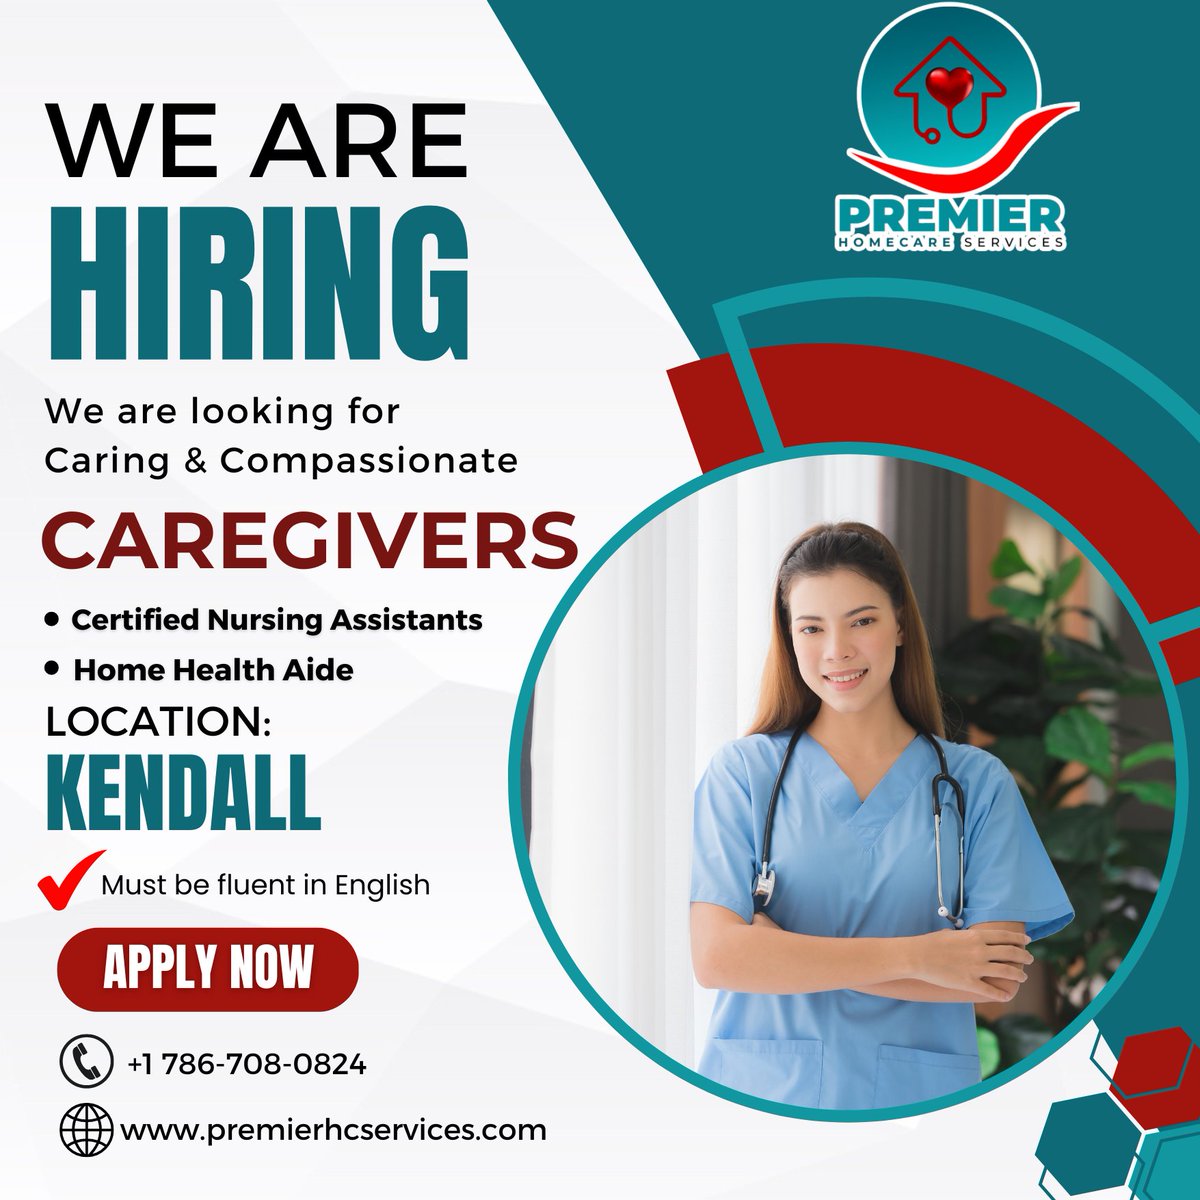 Join our team! 🌟 We're seeking caring and compassionate Caregivers (CNA and HHA) for our Kendall location. Apply today and make a difference! 📷 #premierhcservices #premierhomecareservices #homecare #homecarejobs #CNA #CNAjobs #HHA #HHAjobs